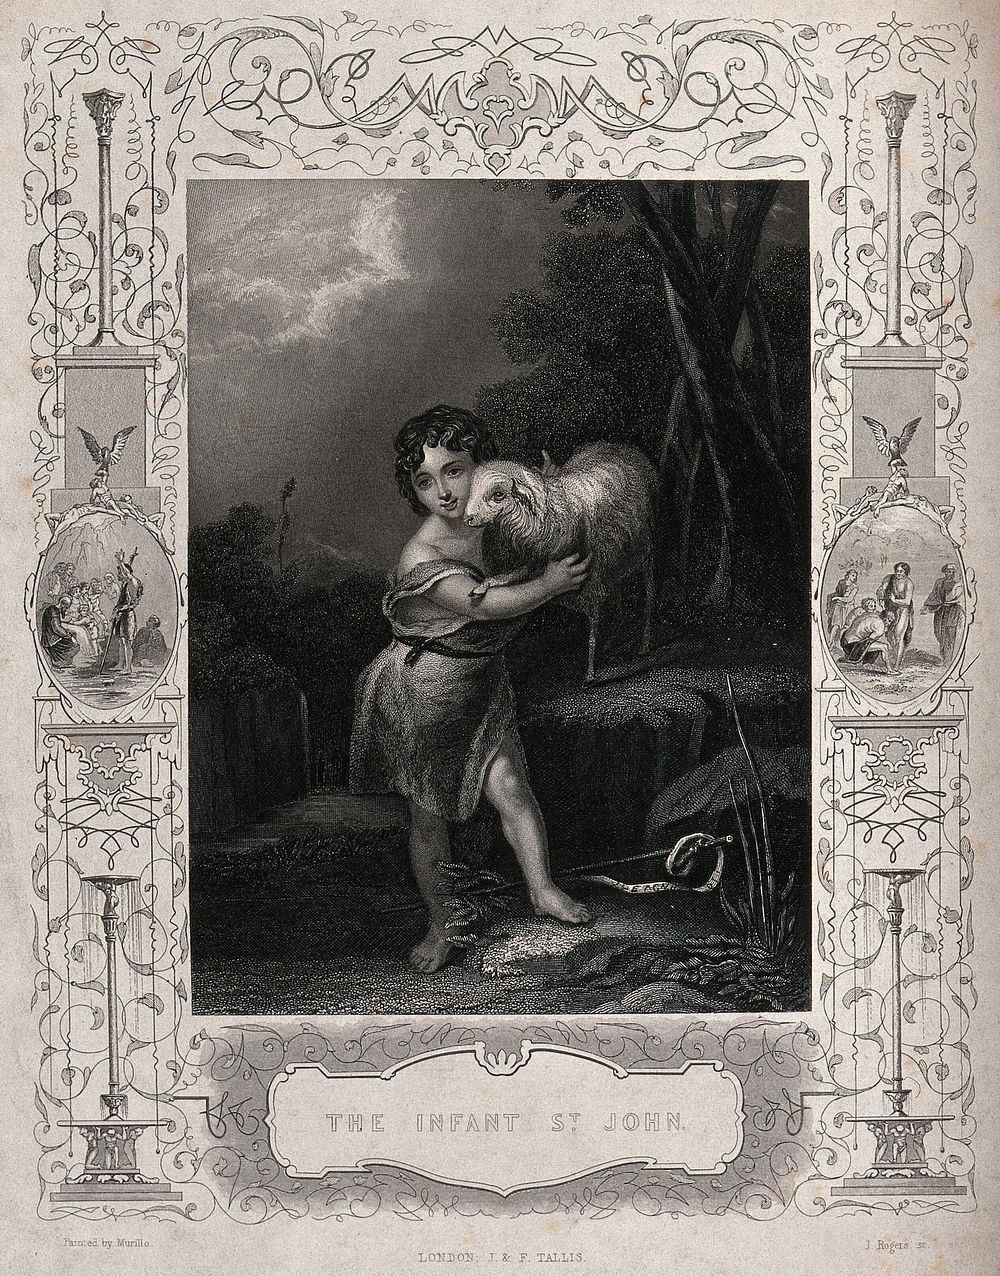 Saint John the Baptist as a child holding a lamb; scenes from his life and grottesche in the border. Engraving by J. Rogers…